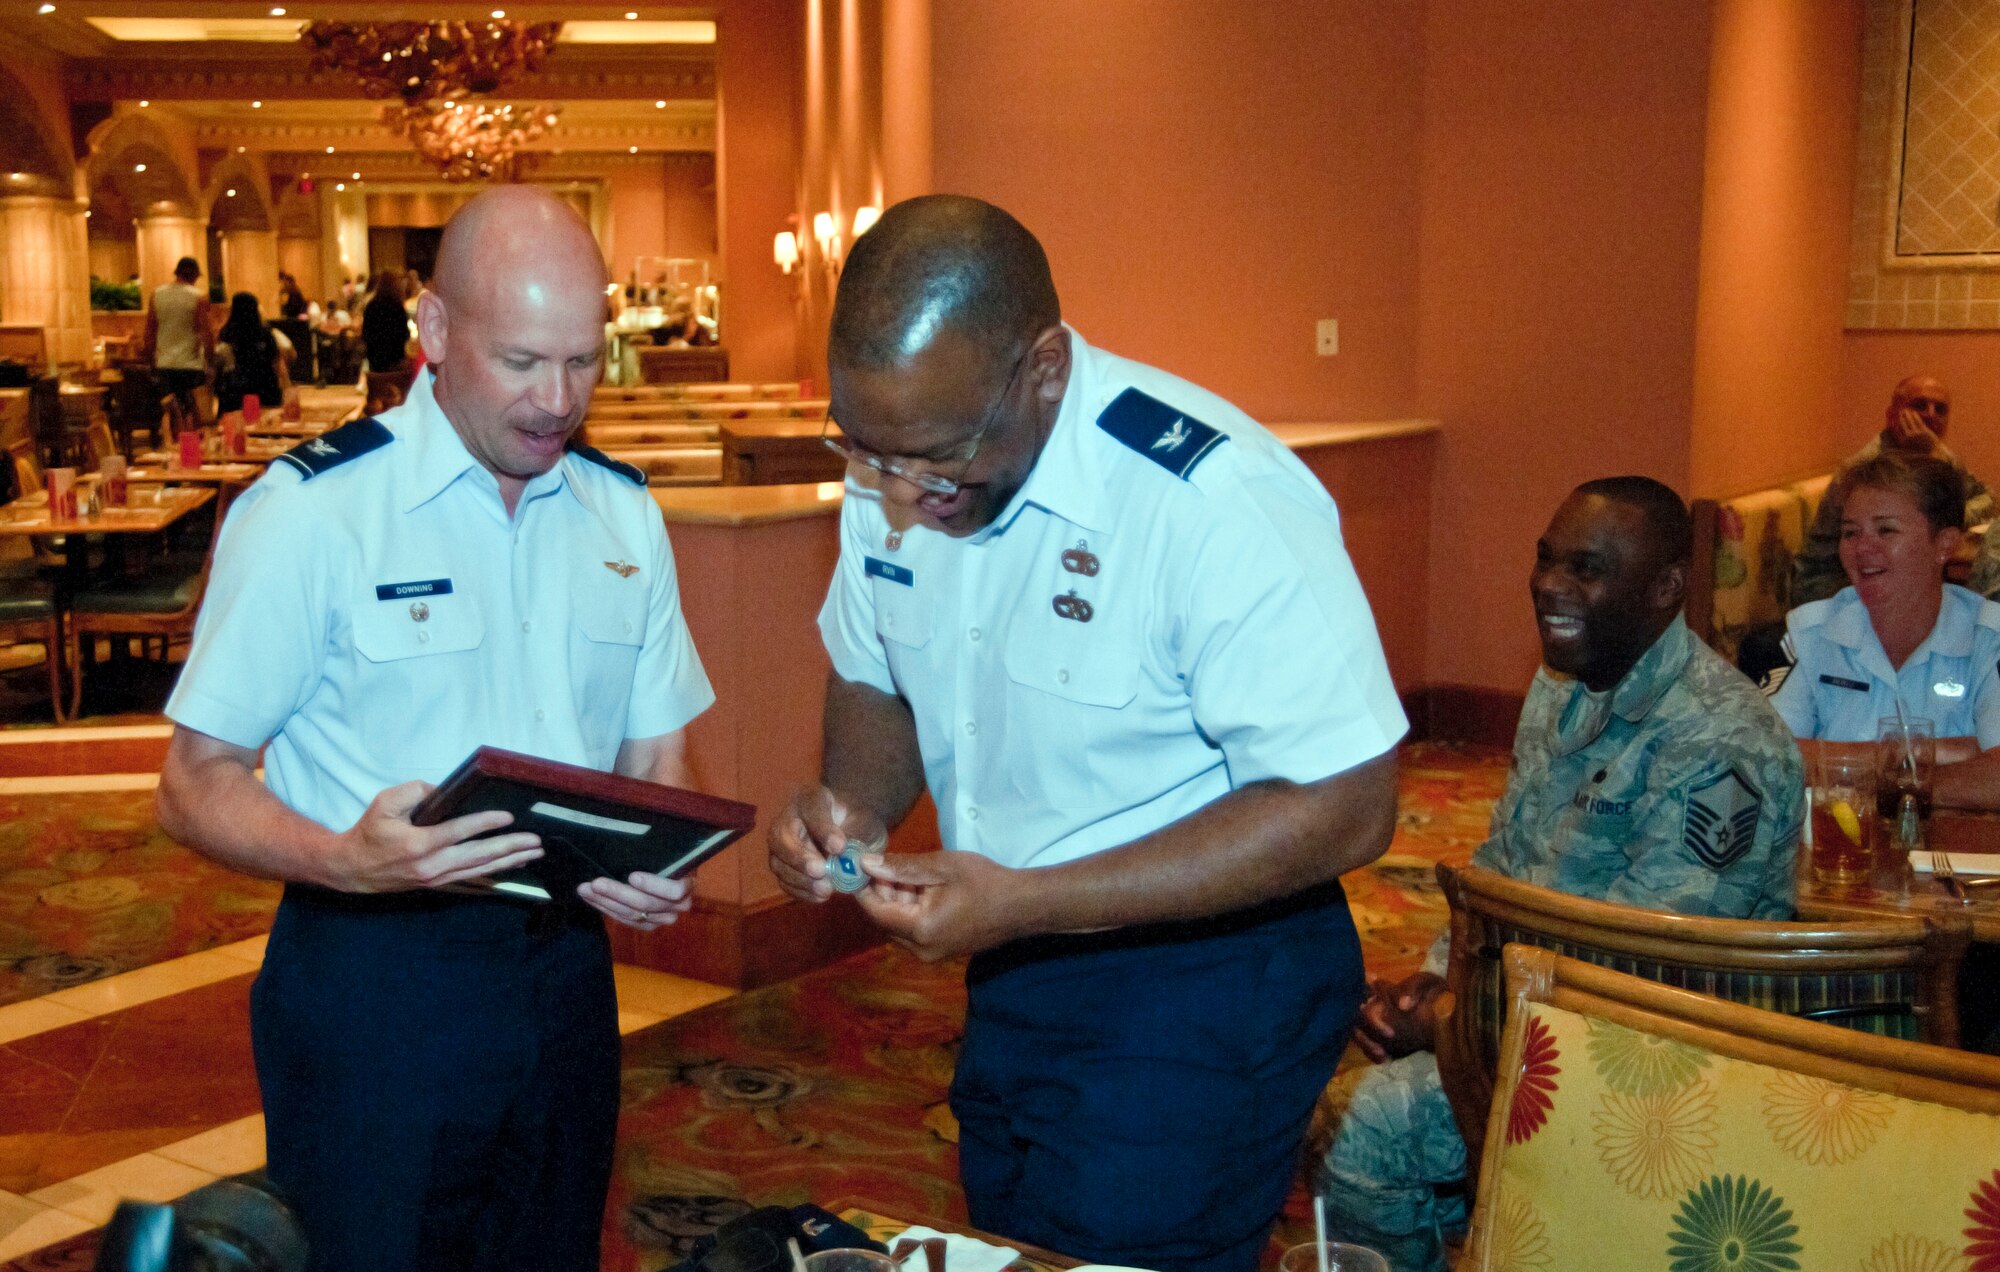 Col. Glen Downing, 81st Training Wing vice commander, presents Col. Marshall Irvin, 403rd Mission Support Group commander, with a few mementos at Colonel Irvin's going away luncheon held at the Beau Rivage Resort and Casino, Biloxi, Miss., March 21.  Colonel Irvin began his new assignment as the 94th Airlift Wing Mission Support Group commander, Dobbins Air Force Base, Ga.  Colonel Irvin served with Reservists from the 403rd Wing from August 2009 to March 2011.